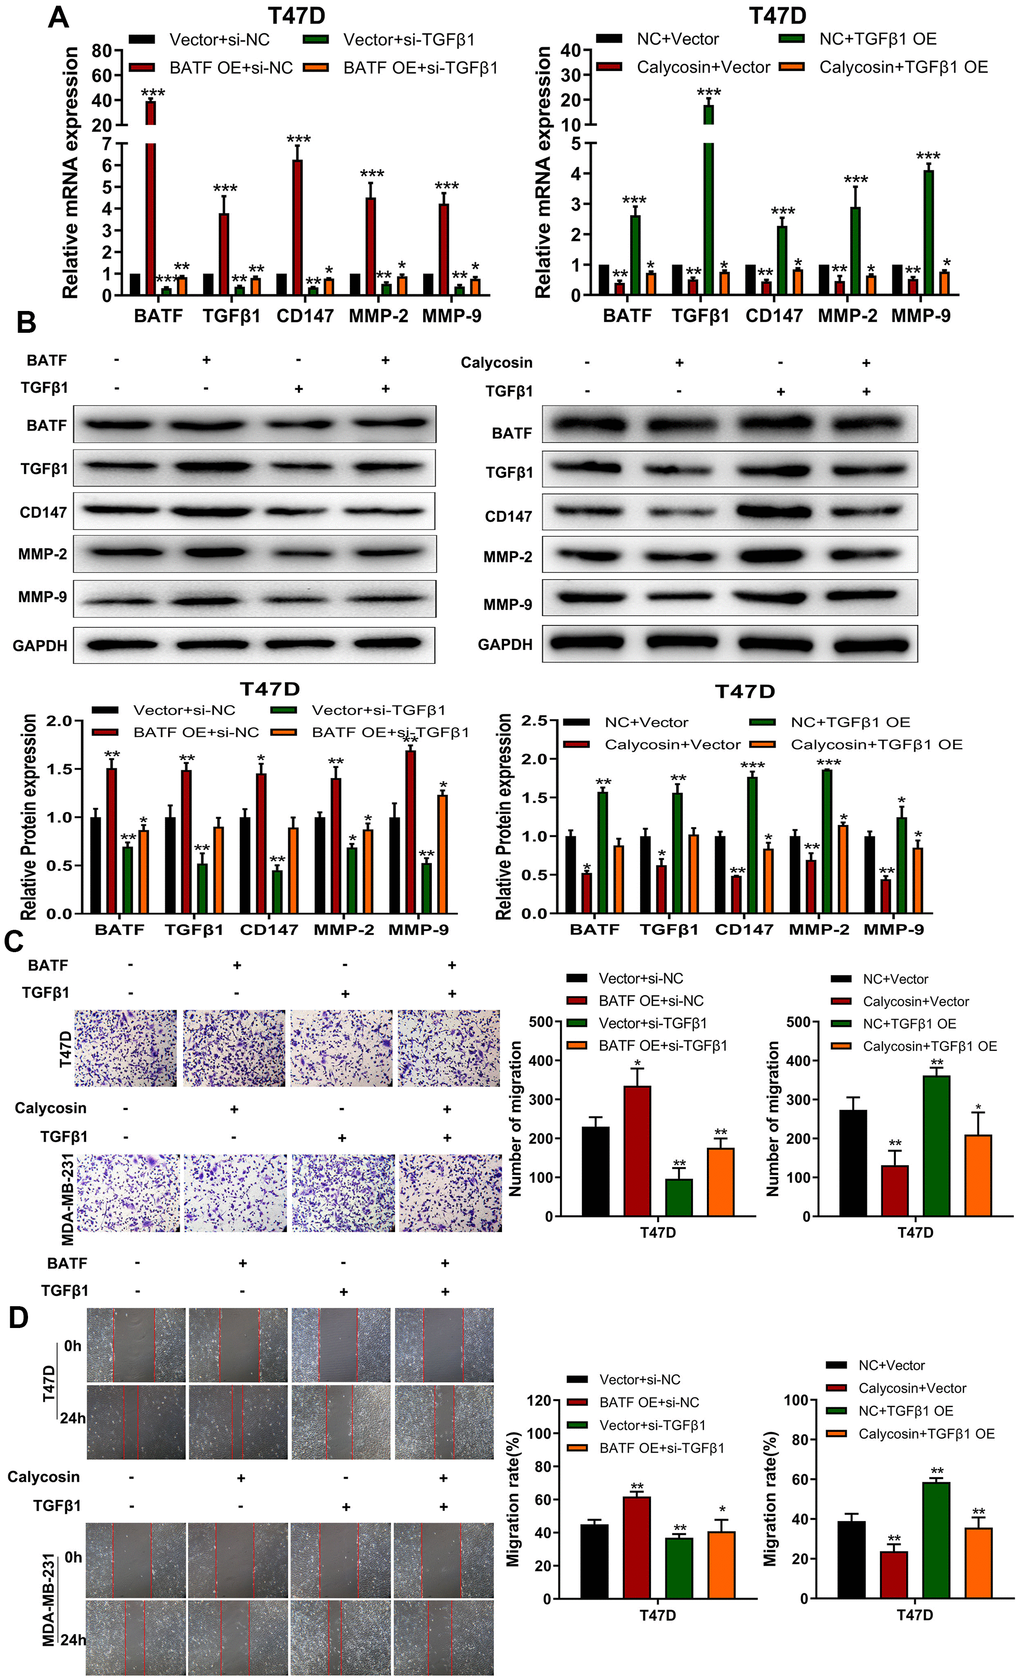 Calycosin inhibits breast cancer cell migration and invasiveness via BATF/TGFβ1. (A) RT-qPCR analysis shows relative levels of BATF, TGFβ1, CD147, MMP-2, and MMP-9 transcripts in BATF-overexpressing cells with or without TGFβ1 knockdown (left panel), and TGFβ1-overexpressing cells treated with or without calycosin (right panel). (B) Western blot analysis shows relative levels of BATF, TGFβ1, CD147, MMP-2, and MMP-9 proteins in BATF-overexpressing cells with or without TGFβ1 knockdown (left panel) and TGFβ1-overexpressing cells treated with or without calycosin (right panel). (C) Transwell invasion assay results show invasiveness of BATF-overexpressing cells with or without TGFβ1 knockdown (left panel) and TGFβ1-overexpressing cells treated with or without calycosin (right panel). (D) Wound healing assay results show the migration ability of BATF-overexpressing cells with or without TGFβ1 knockdown (left panel) and TGFβ1-overexpressing cells treated with or without calycosin (right panel). The data were represented as means ± SD. *PPP